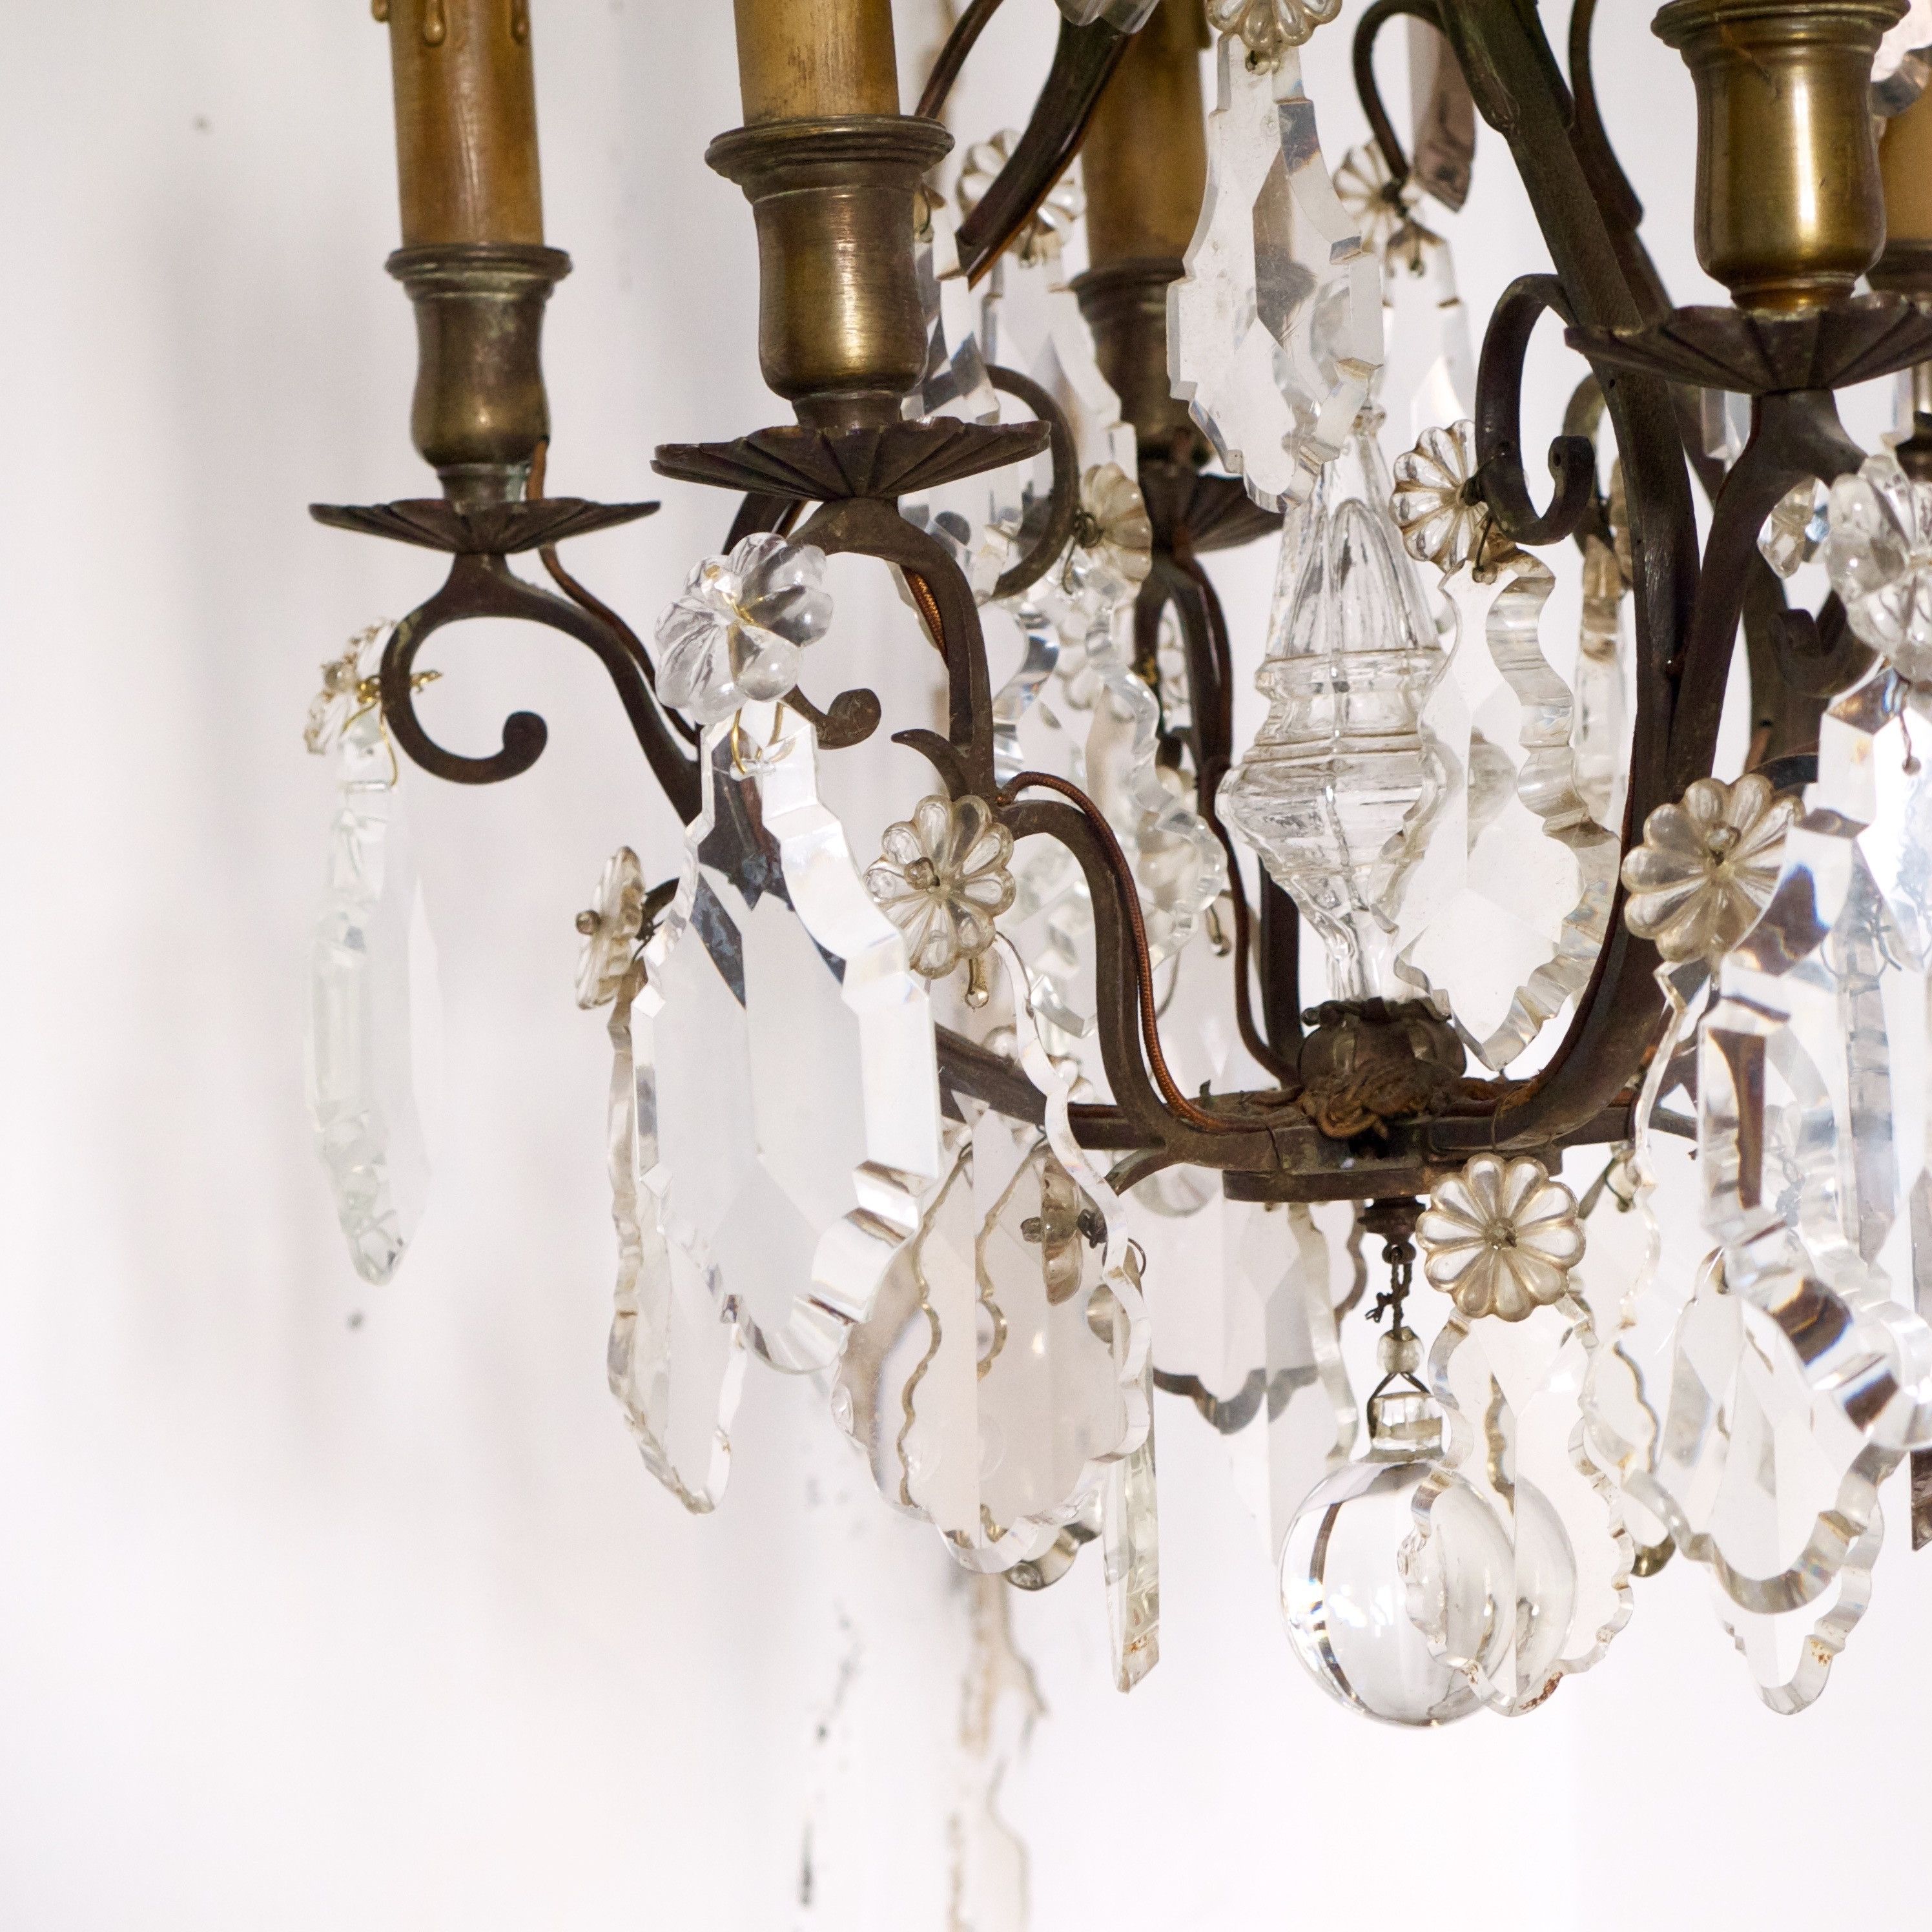 Antique French Chandeliers Throughout Most Up To Date Chandeliers : Bronze Chandelier Beautiful Antique Crystal French (View 18 of 20)